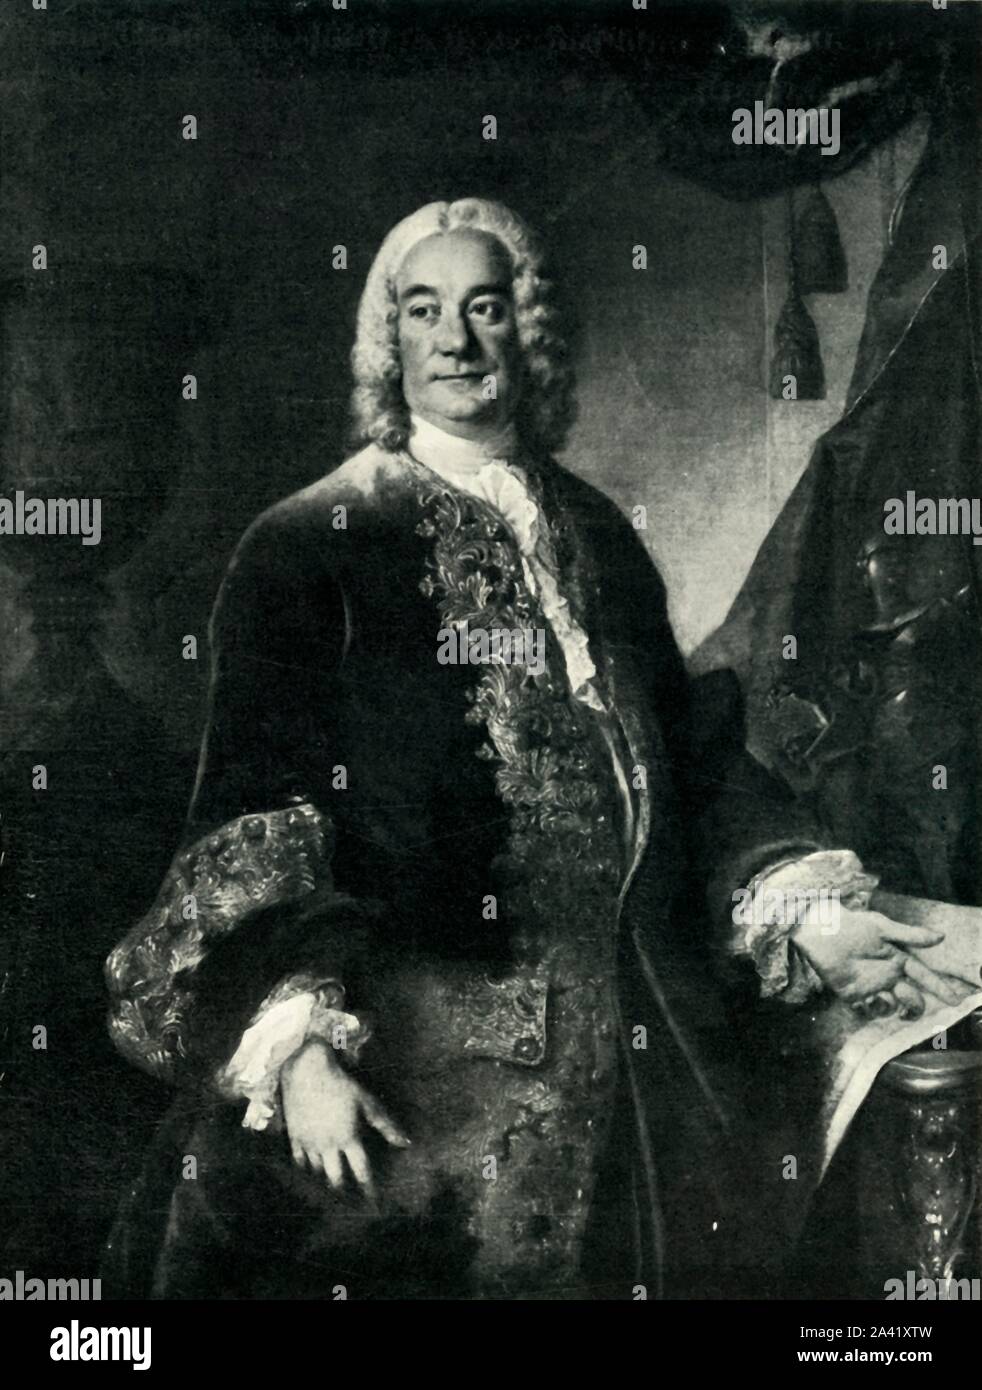 Charles Fran&#xe7;ois Paul Le Normant de Tournehem, 1750, (1903). 'M. Lenormant De Tournehem, Directeur Des B&#xe2;timents Du Roi'. Portrait of French financier de Tournehem (1684-1751), director of the King's Buildings (a division of Department of the household of the Kings of France, responsible for building works at the King's residences in and around Paris). He was also the legal guardian of Madame de Pompadour. In the background is the Medici Vase, now in the Uffizi Gallery in Florence. After a painting by Louis Tocqu&#xe9;, in the collection of the palace of Versailles, France. From &quo Stock Photo